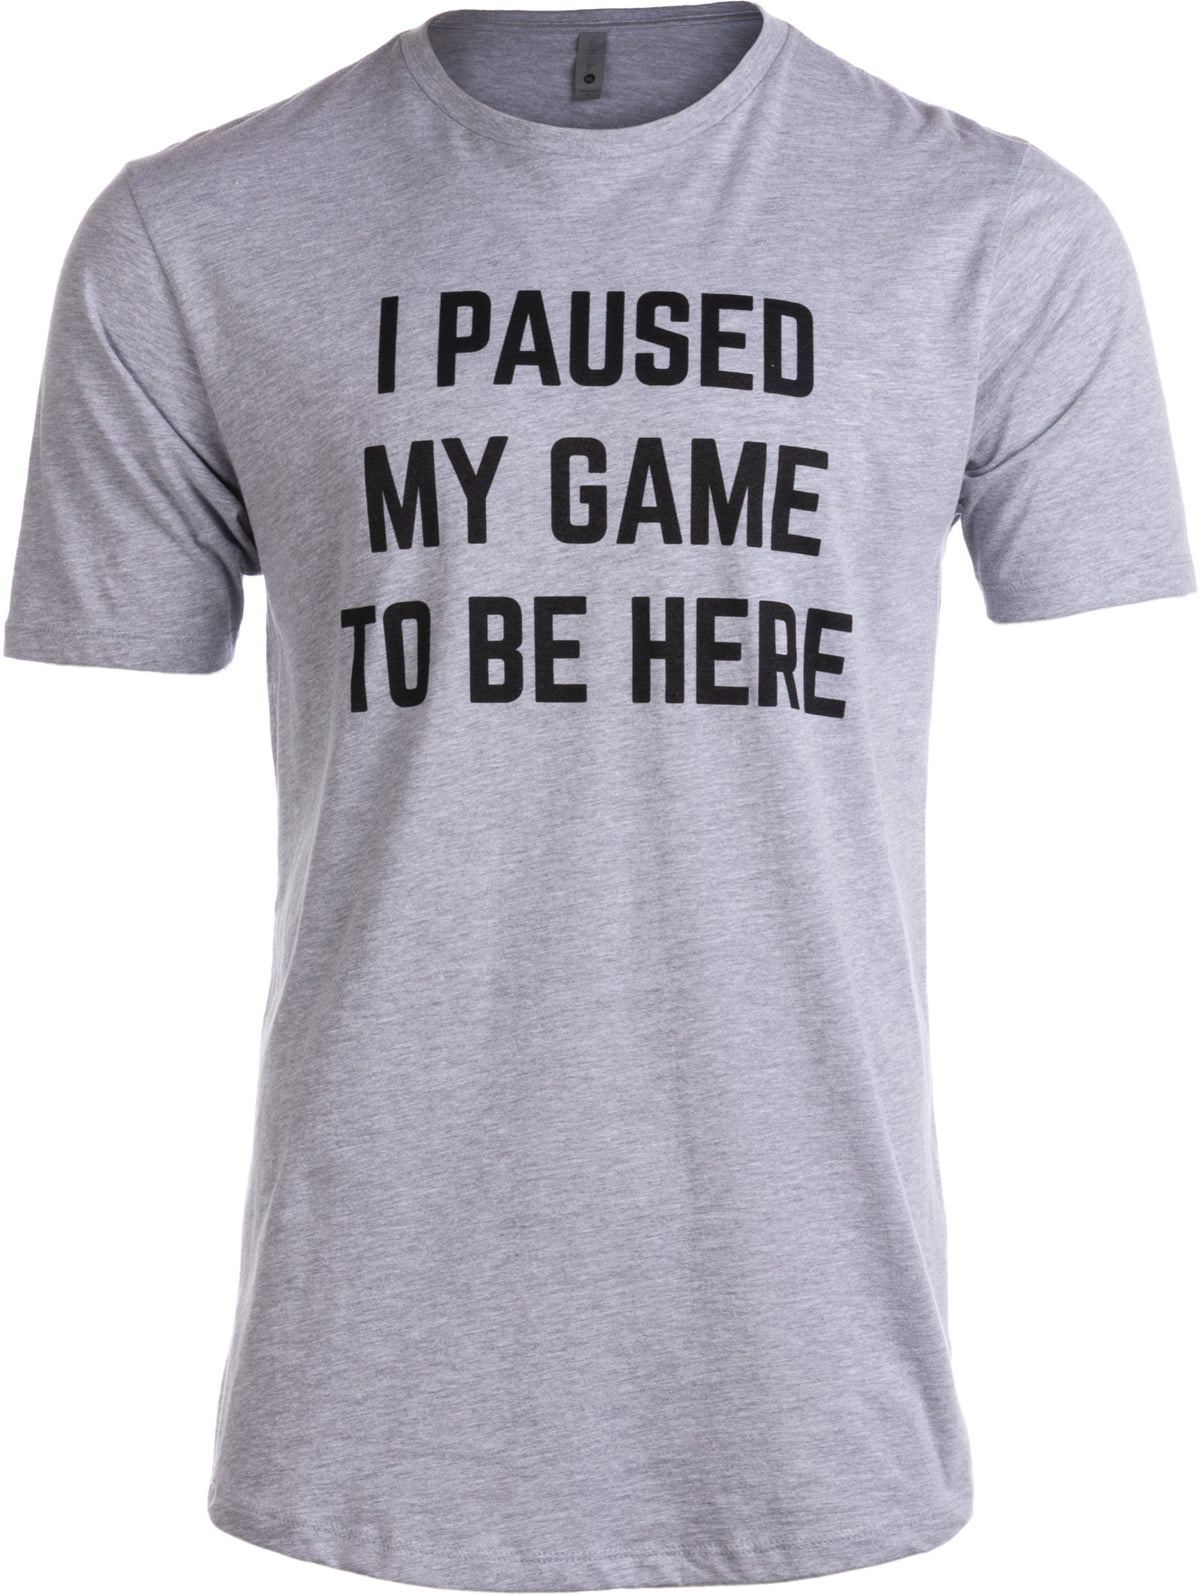 Tall Tee: I Paused my Game to Be Here | Funny Video Gamer Humor Joke Men T-shirt